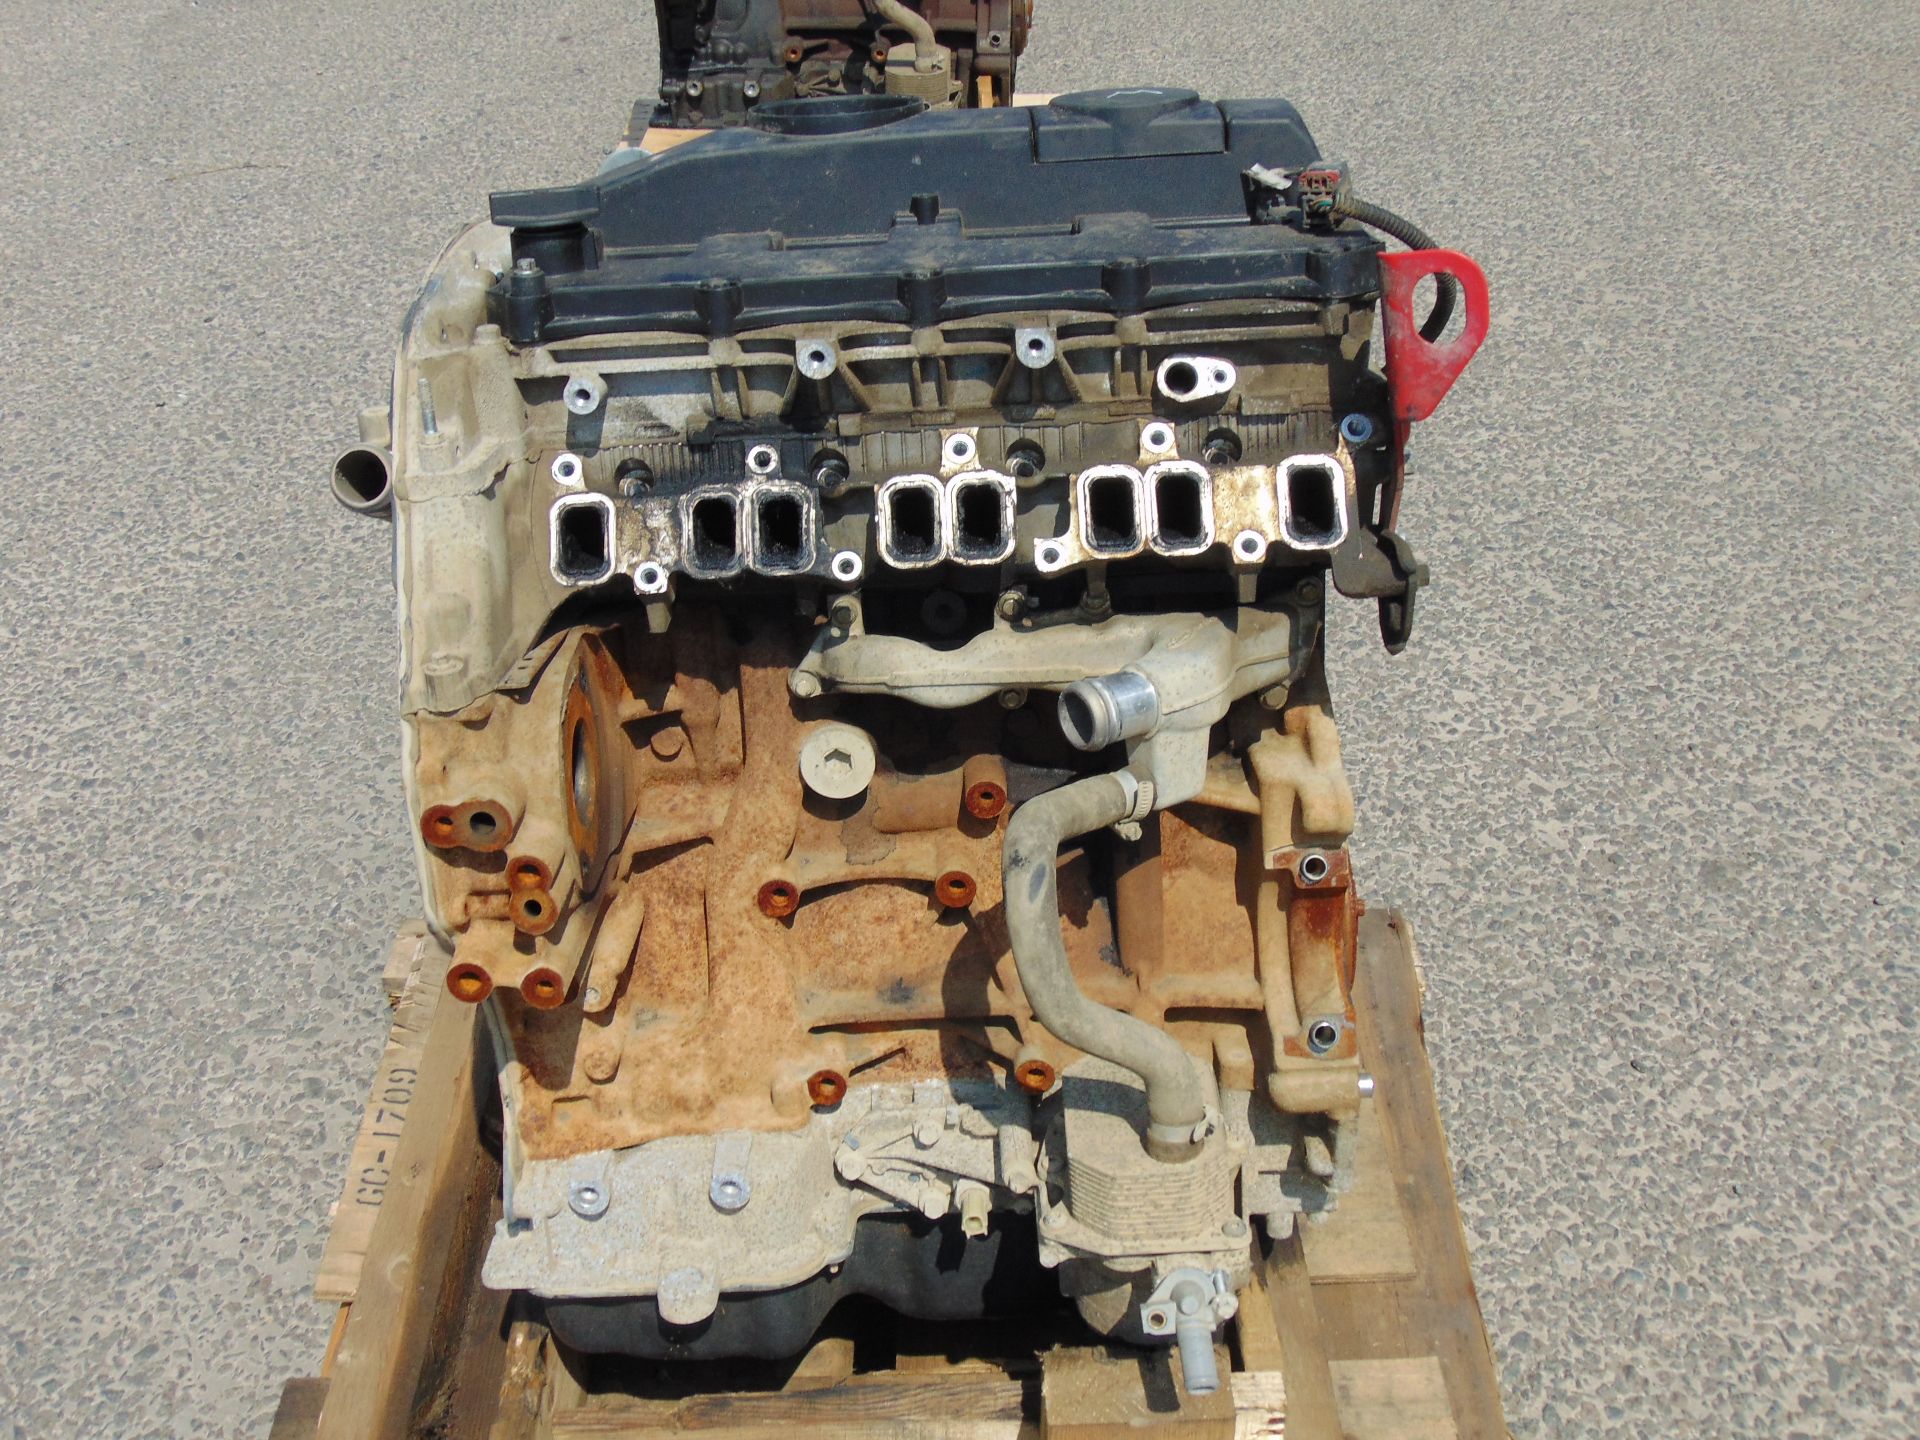 Takeout Land Rover Puma Engine - Image 5 of 6